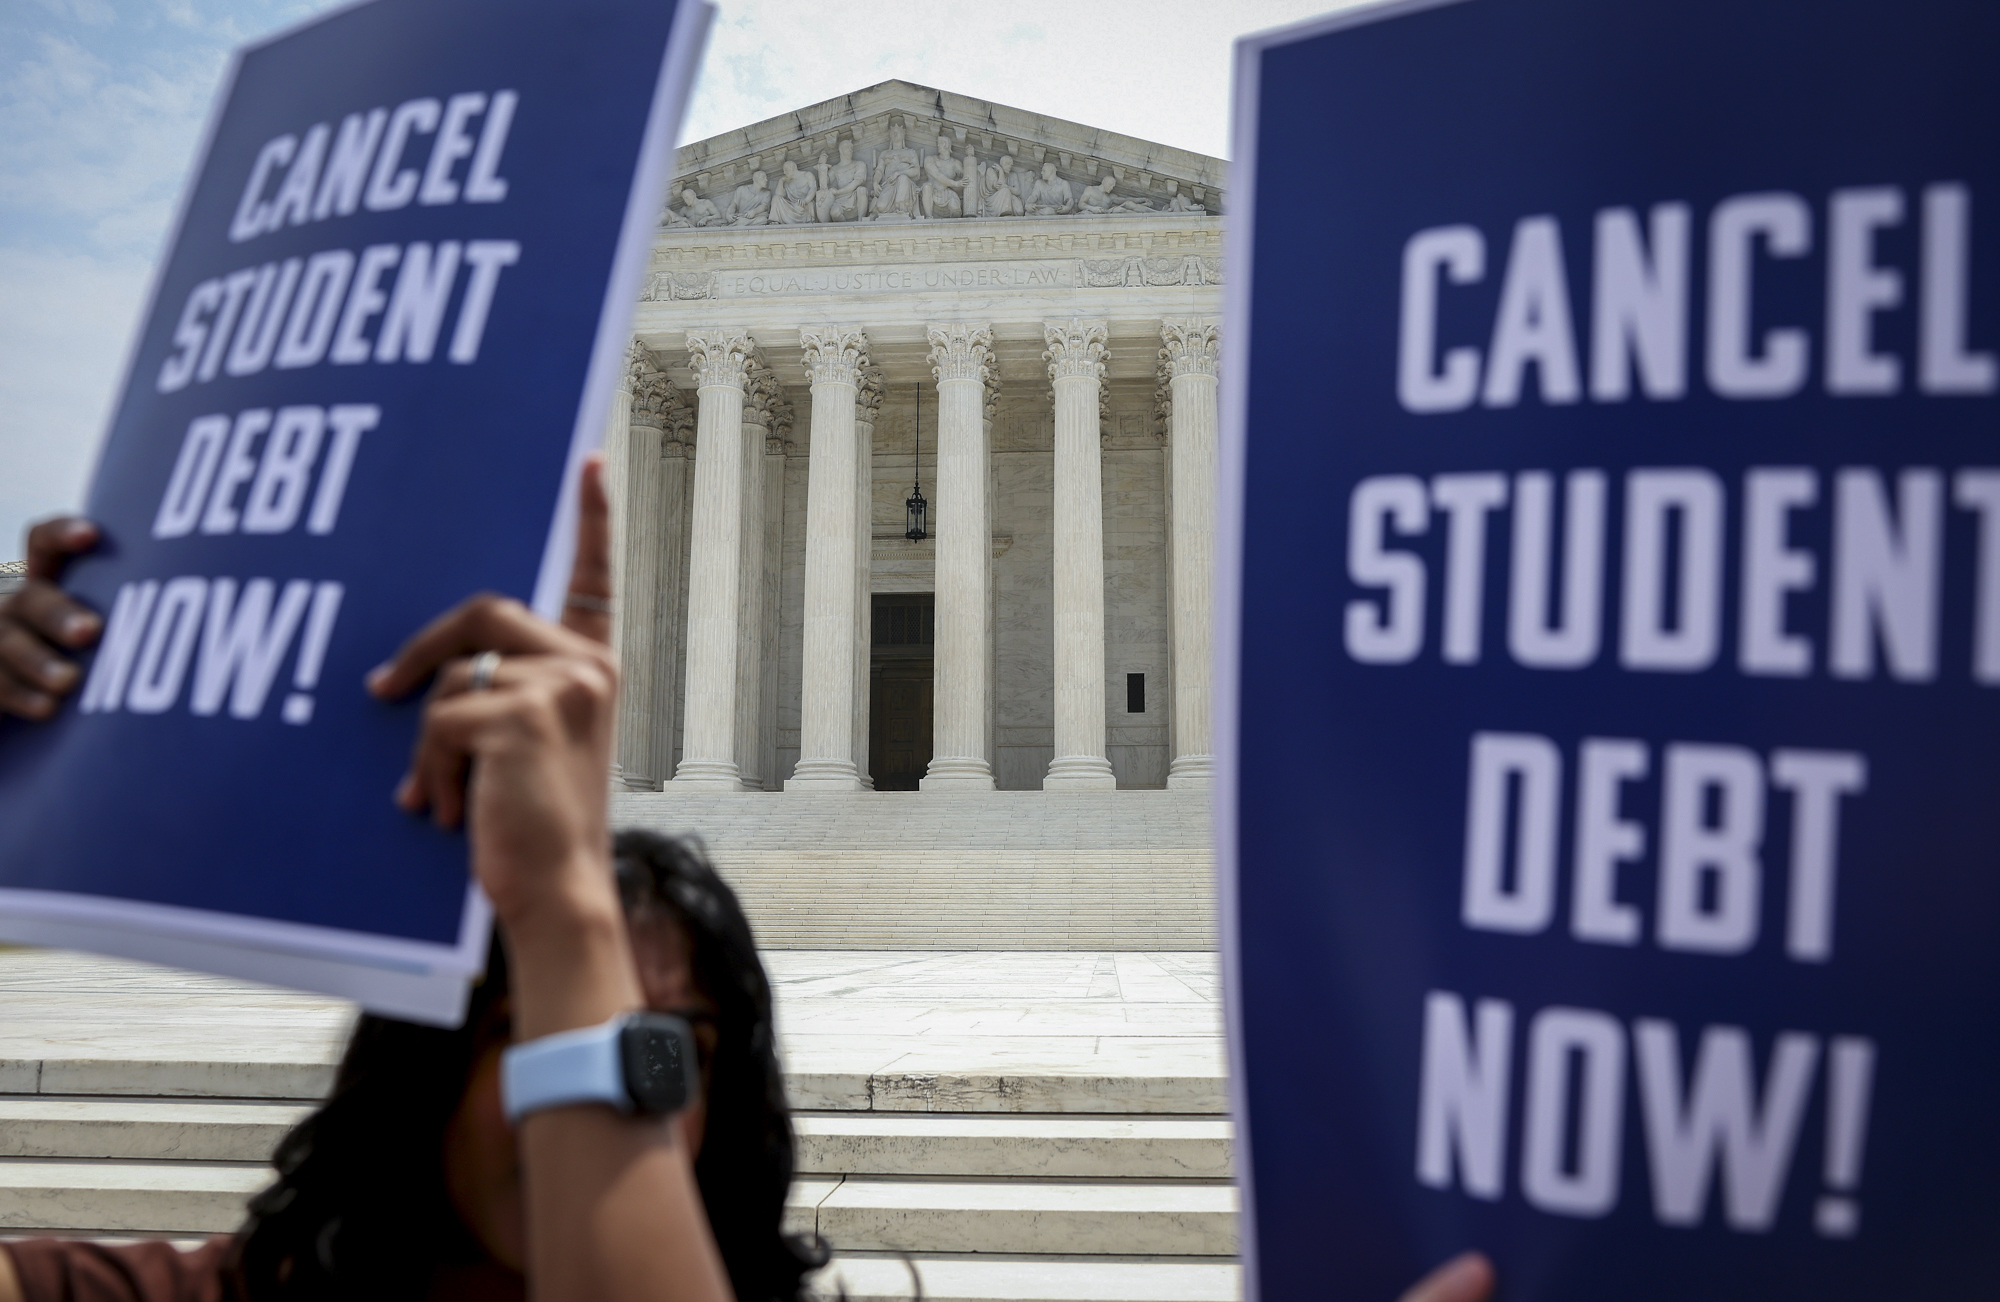 People hold signs reading "Cancel Student Debt Now!" in front of the columned facade of the supreme court.